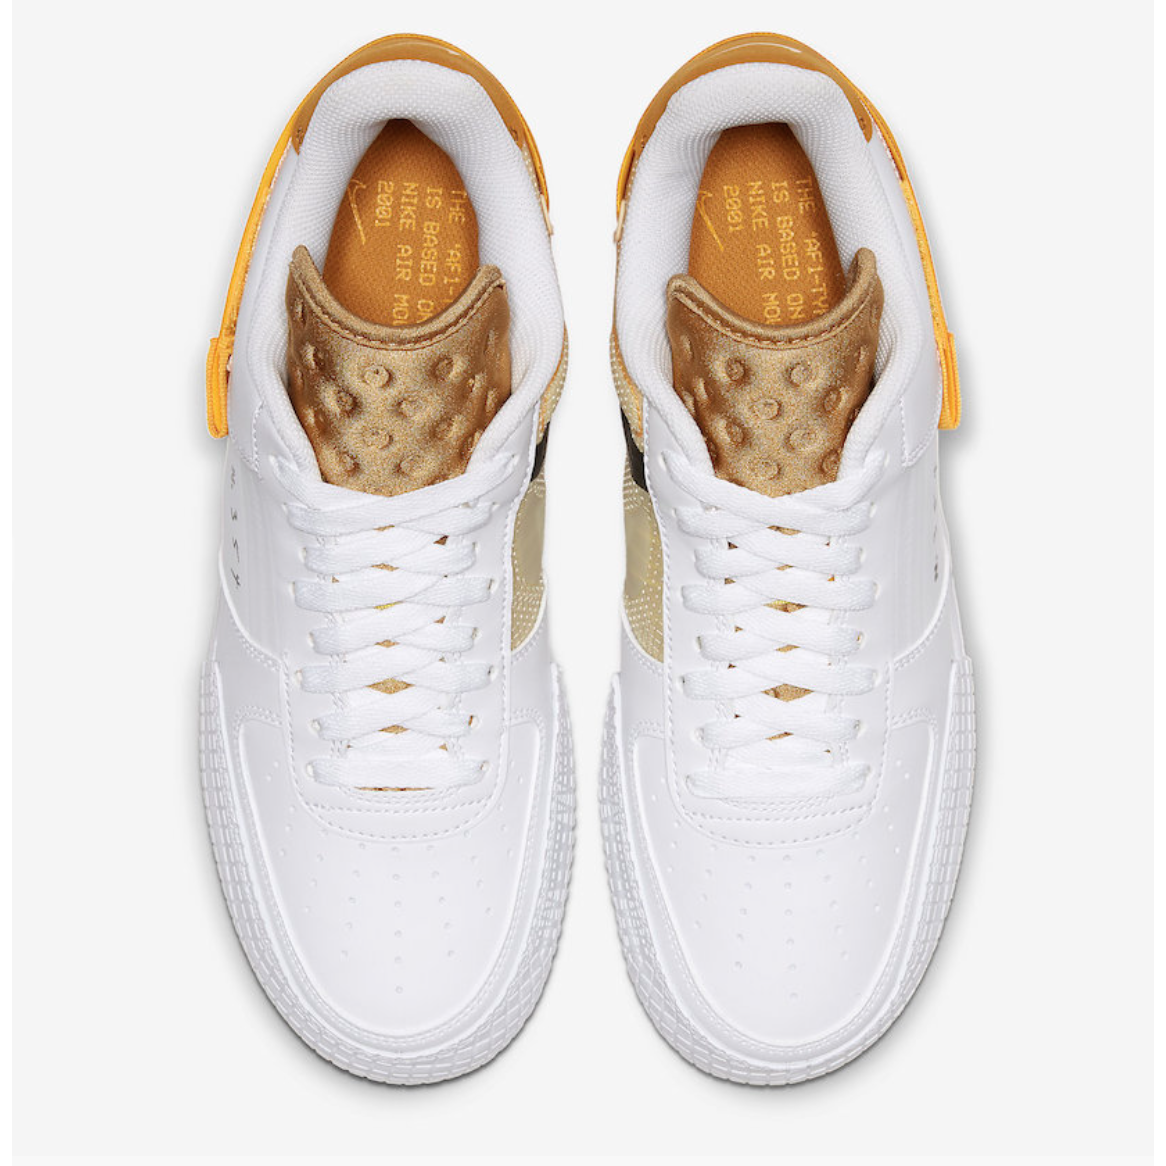 Air Force 1 - Type Yellow